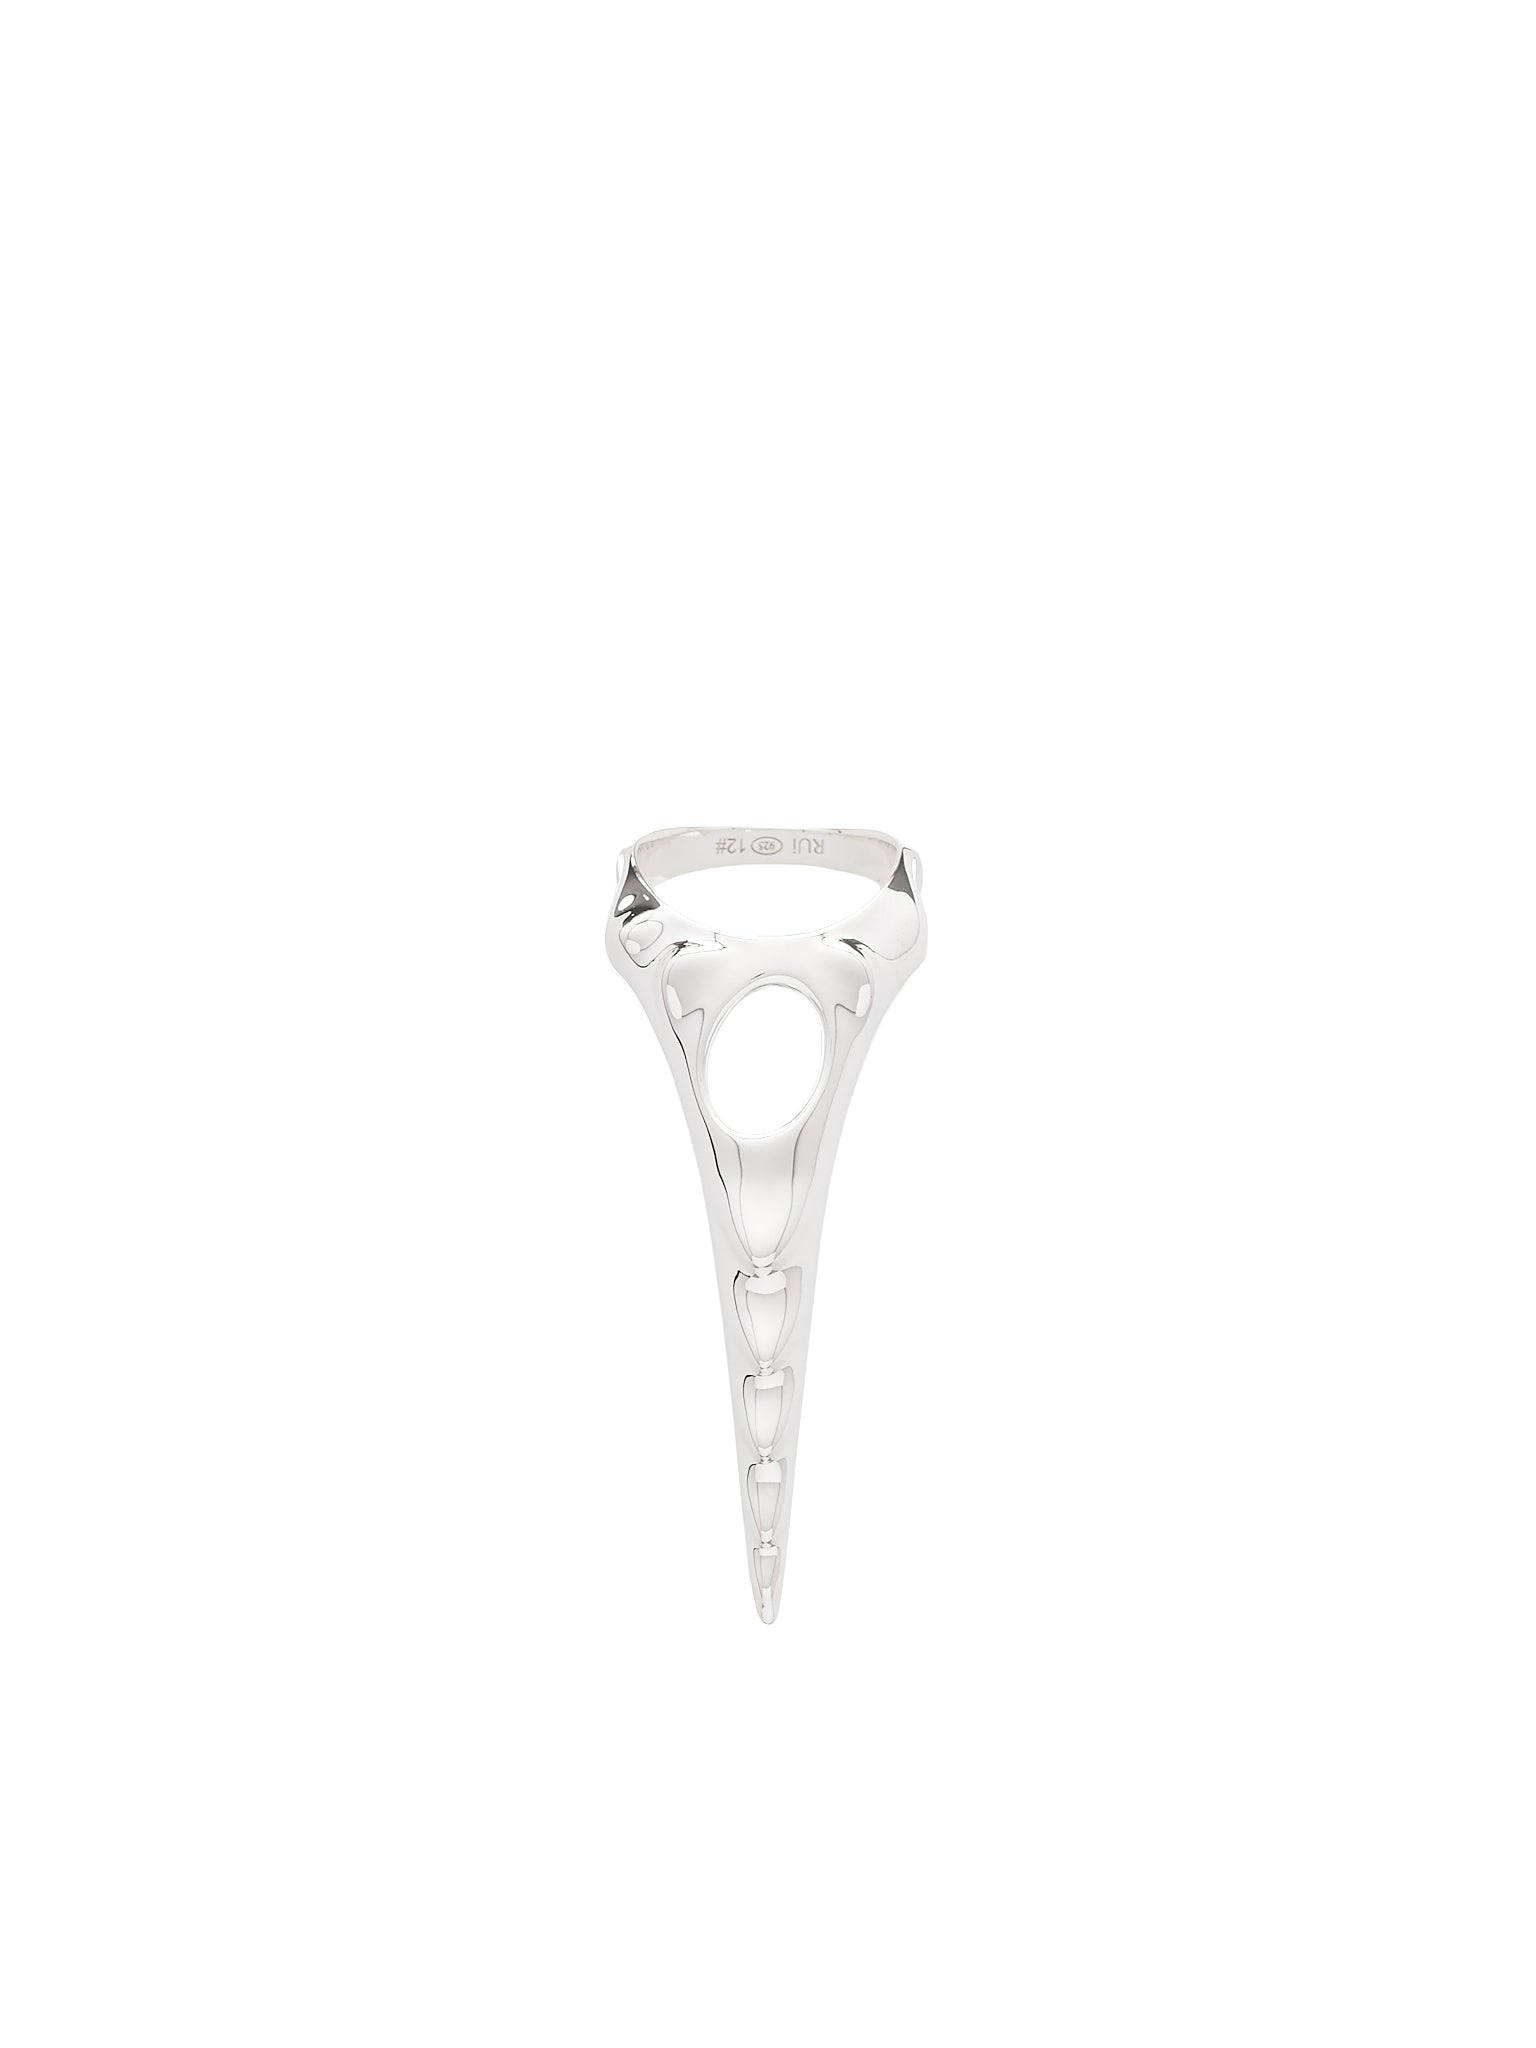 Bright Silver Claw Ring - 1